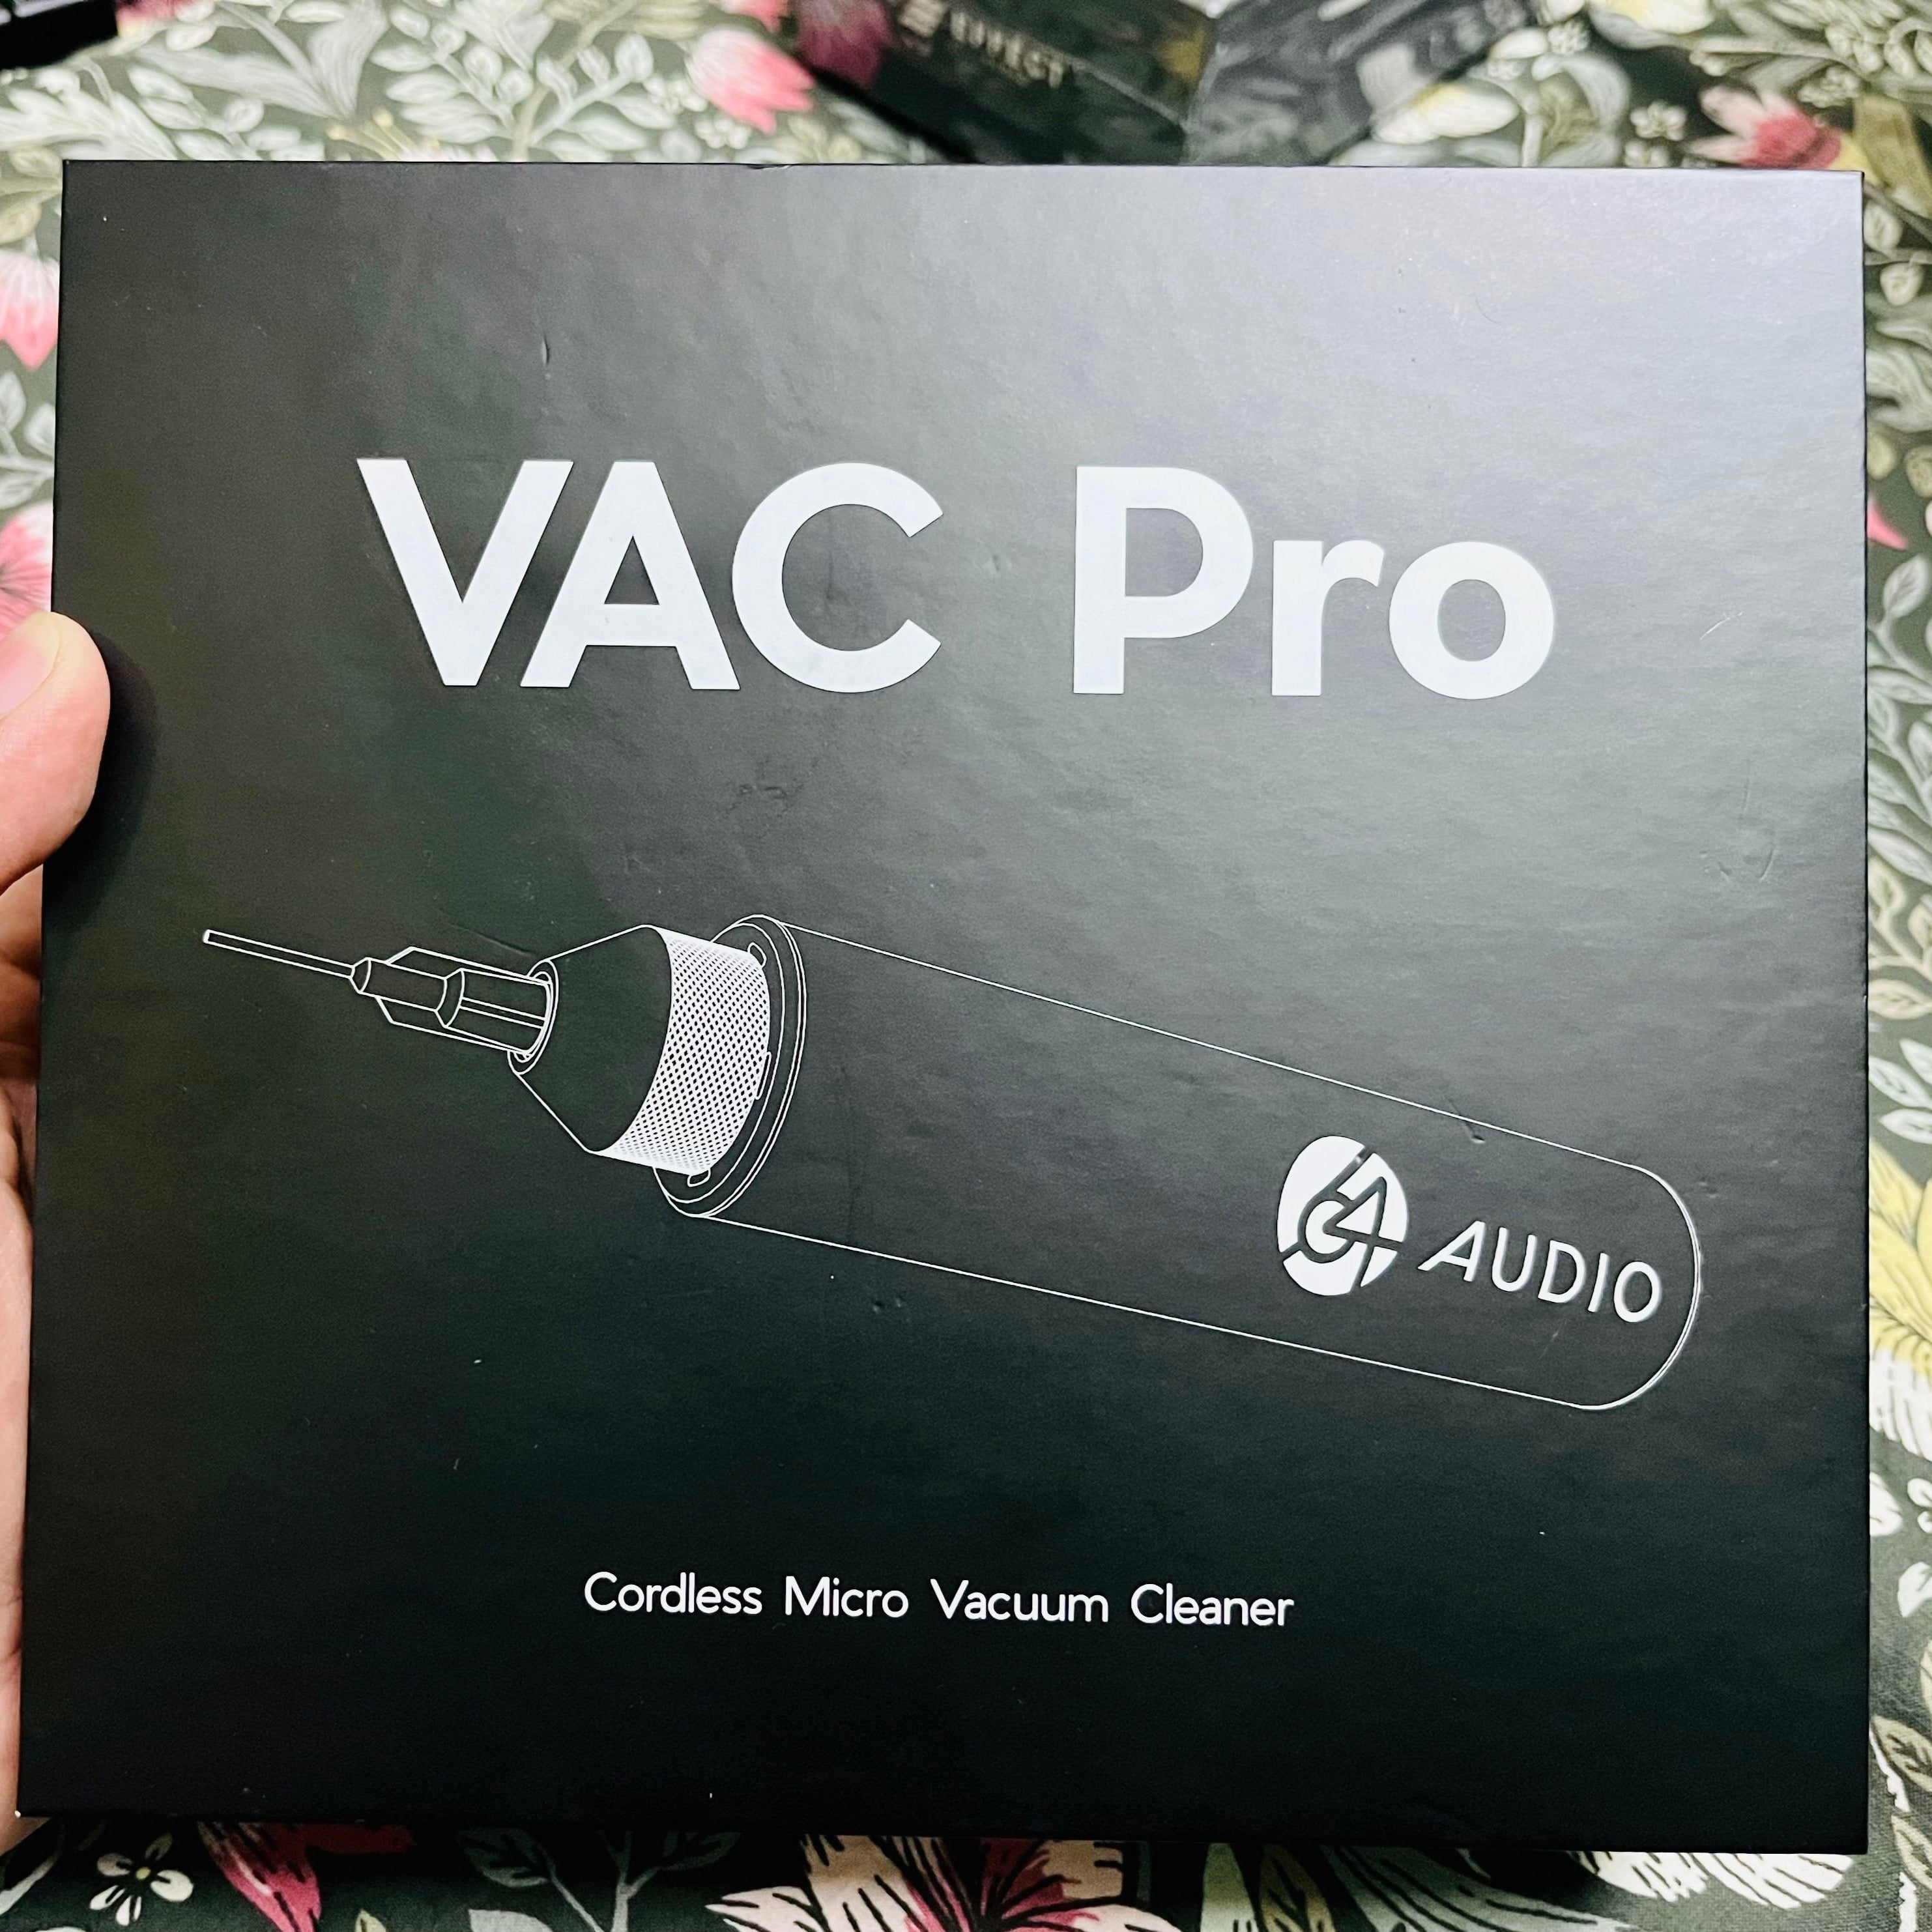 64 Audio - VAC Pro (Pre-Owned)